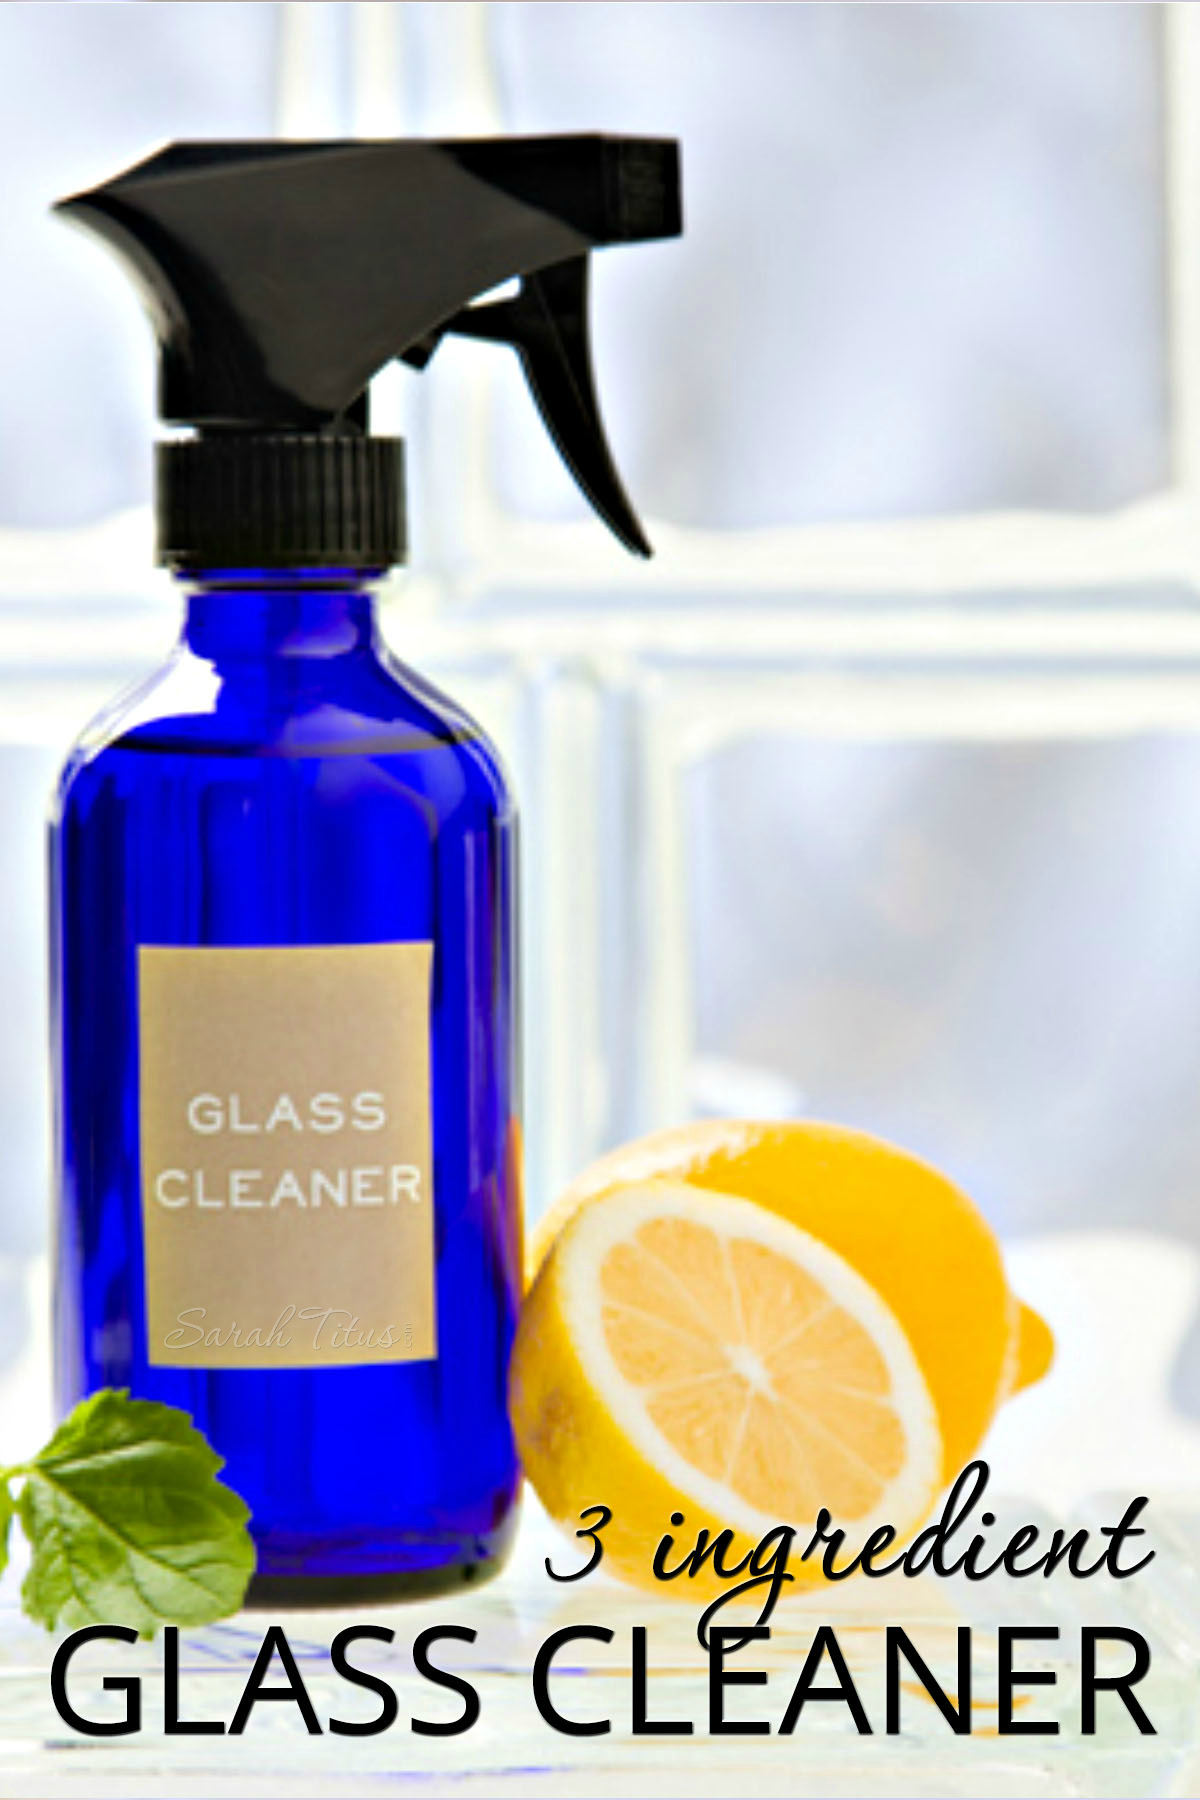 This 3 ingredient homemade window cleaner not only gives you a streak free shine on glass, you probably already have the ingredients in your home right now! #vinegar #water #essentialoils